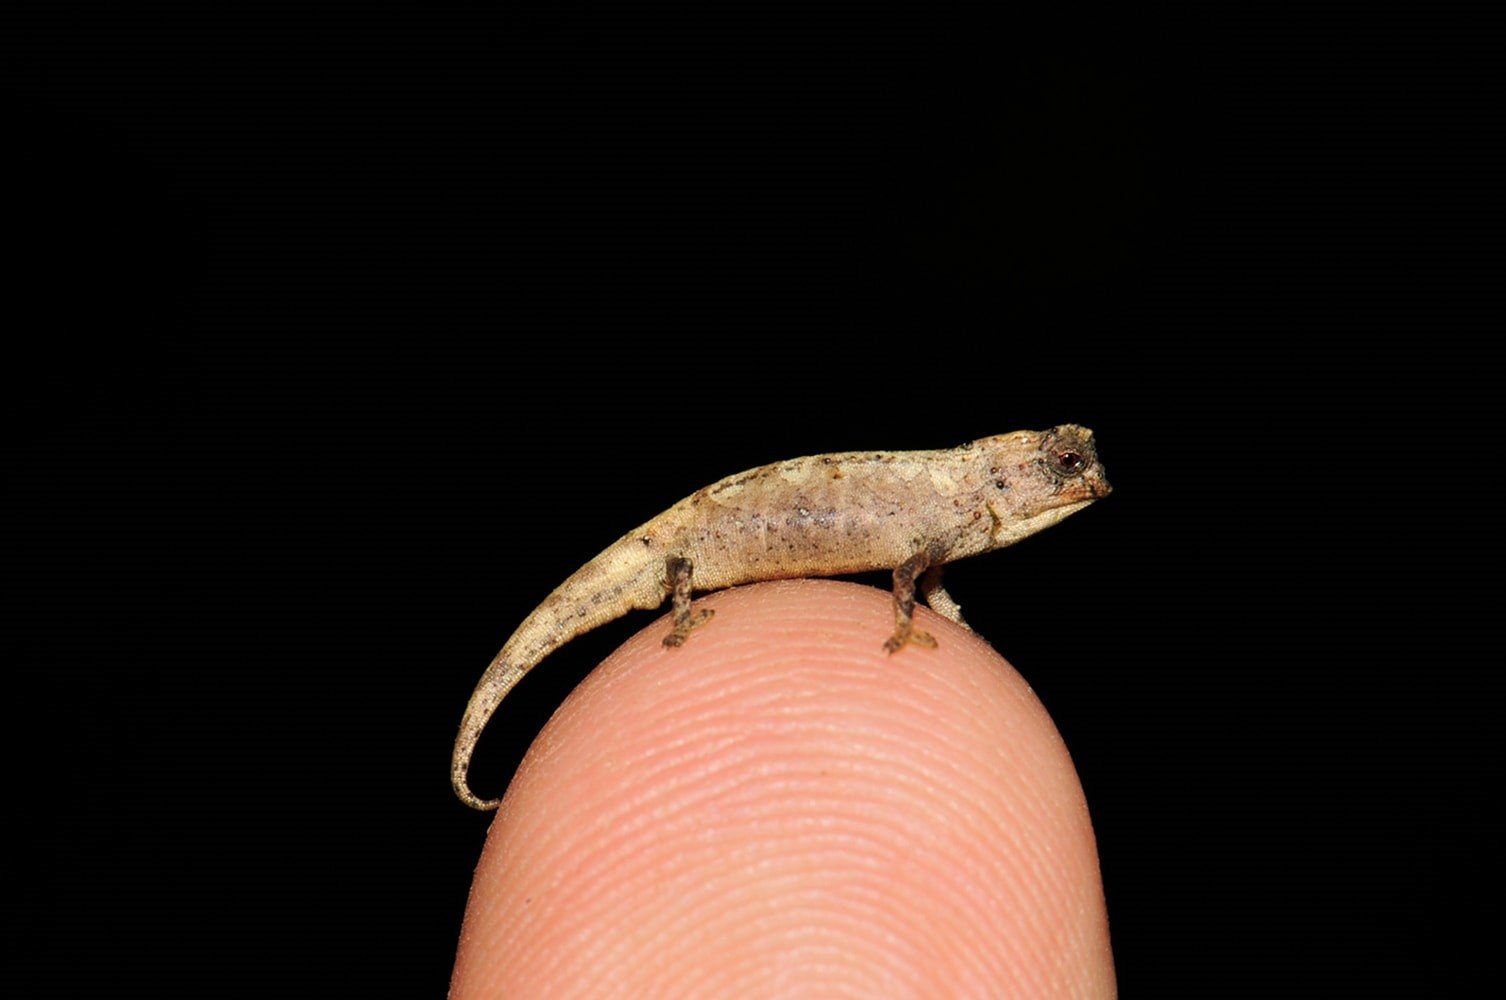 Sitting comfortably on the tip of a finger, Brookesia nana, potentially the world’s smallest reptile, was recently found in northern Madagascar, Feb. 4, 2021. (REUTERS Photo)